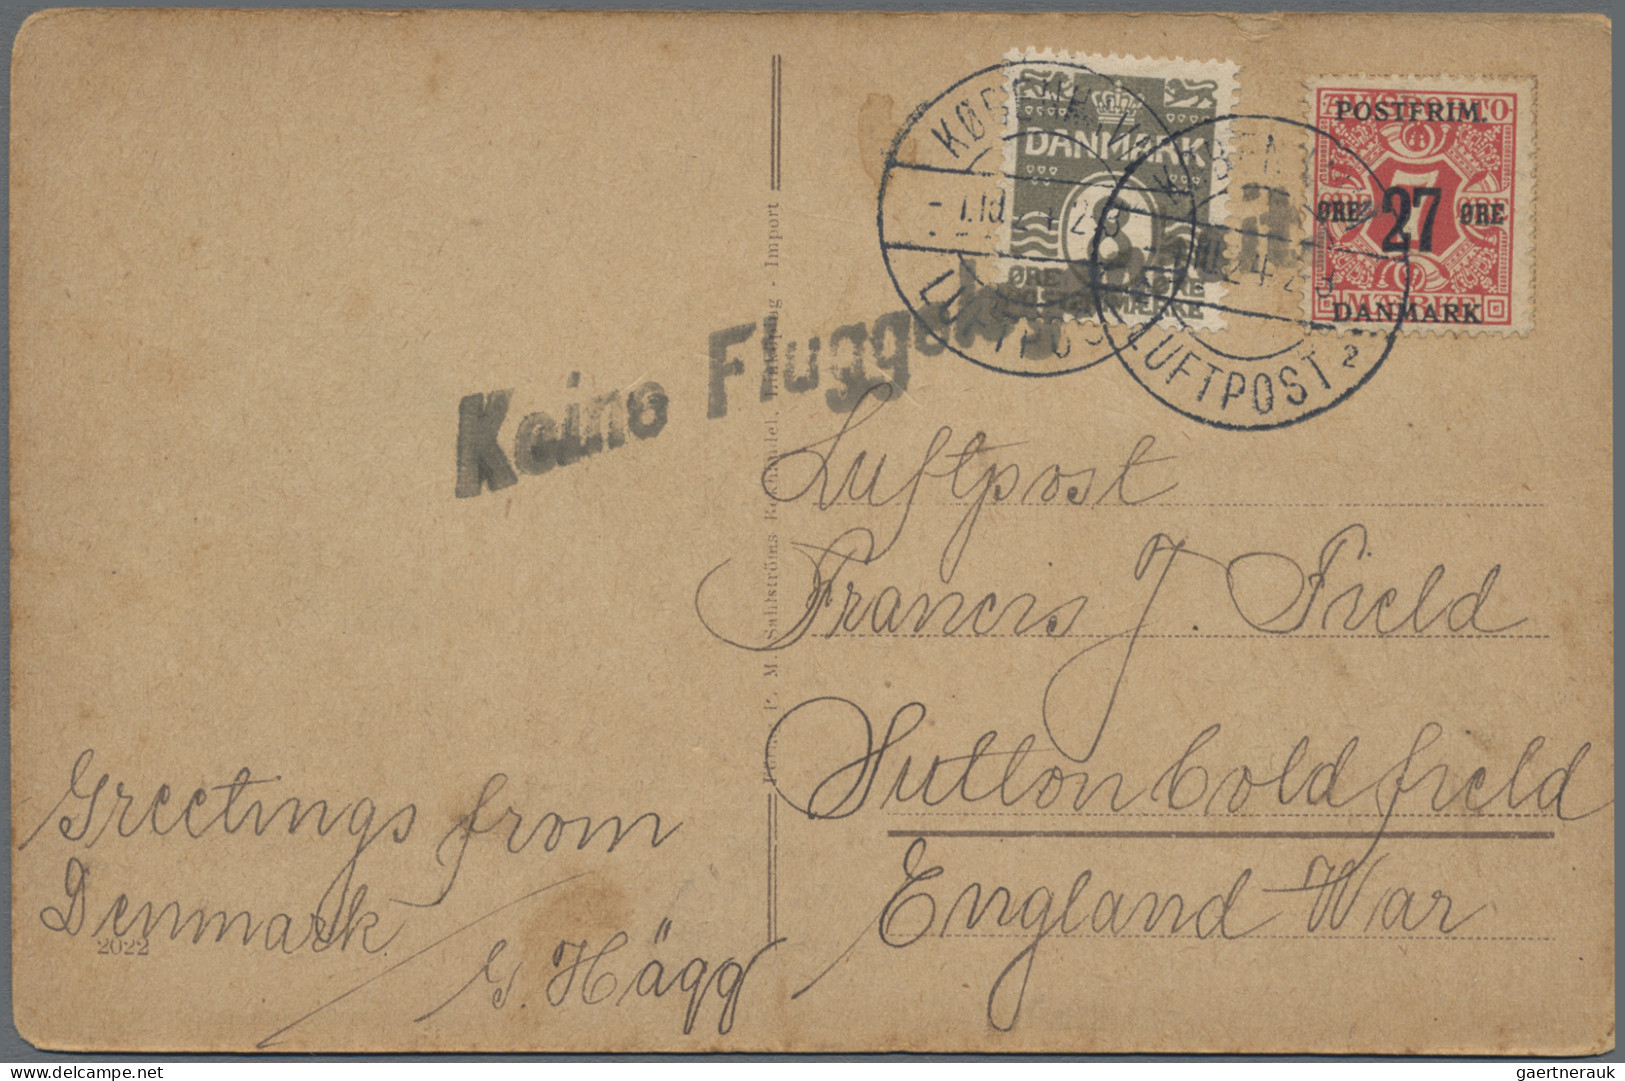 Air Mail: 1922/1925 ca.: 32 airmail cards, covers and postal stationery items fr